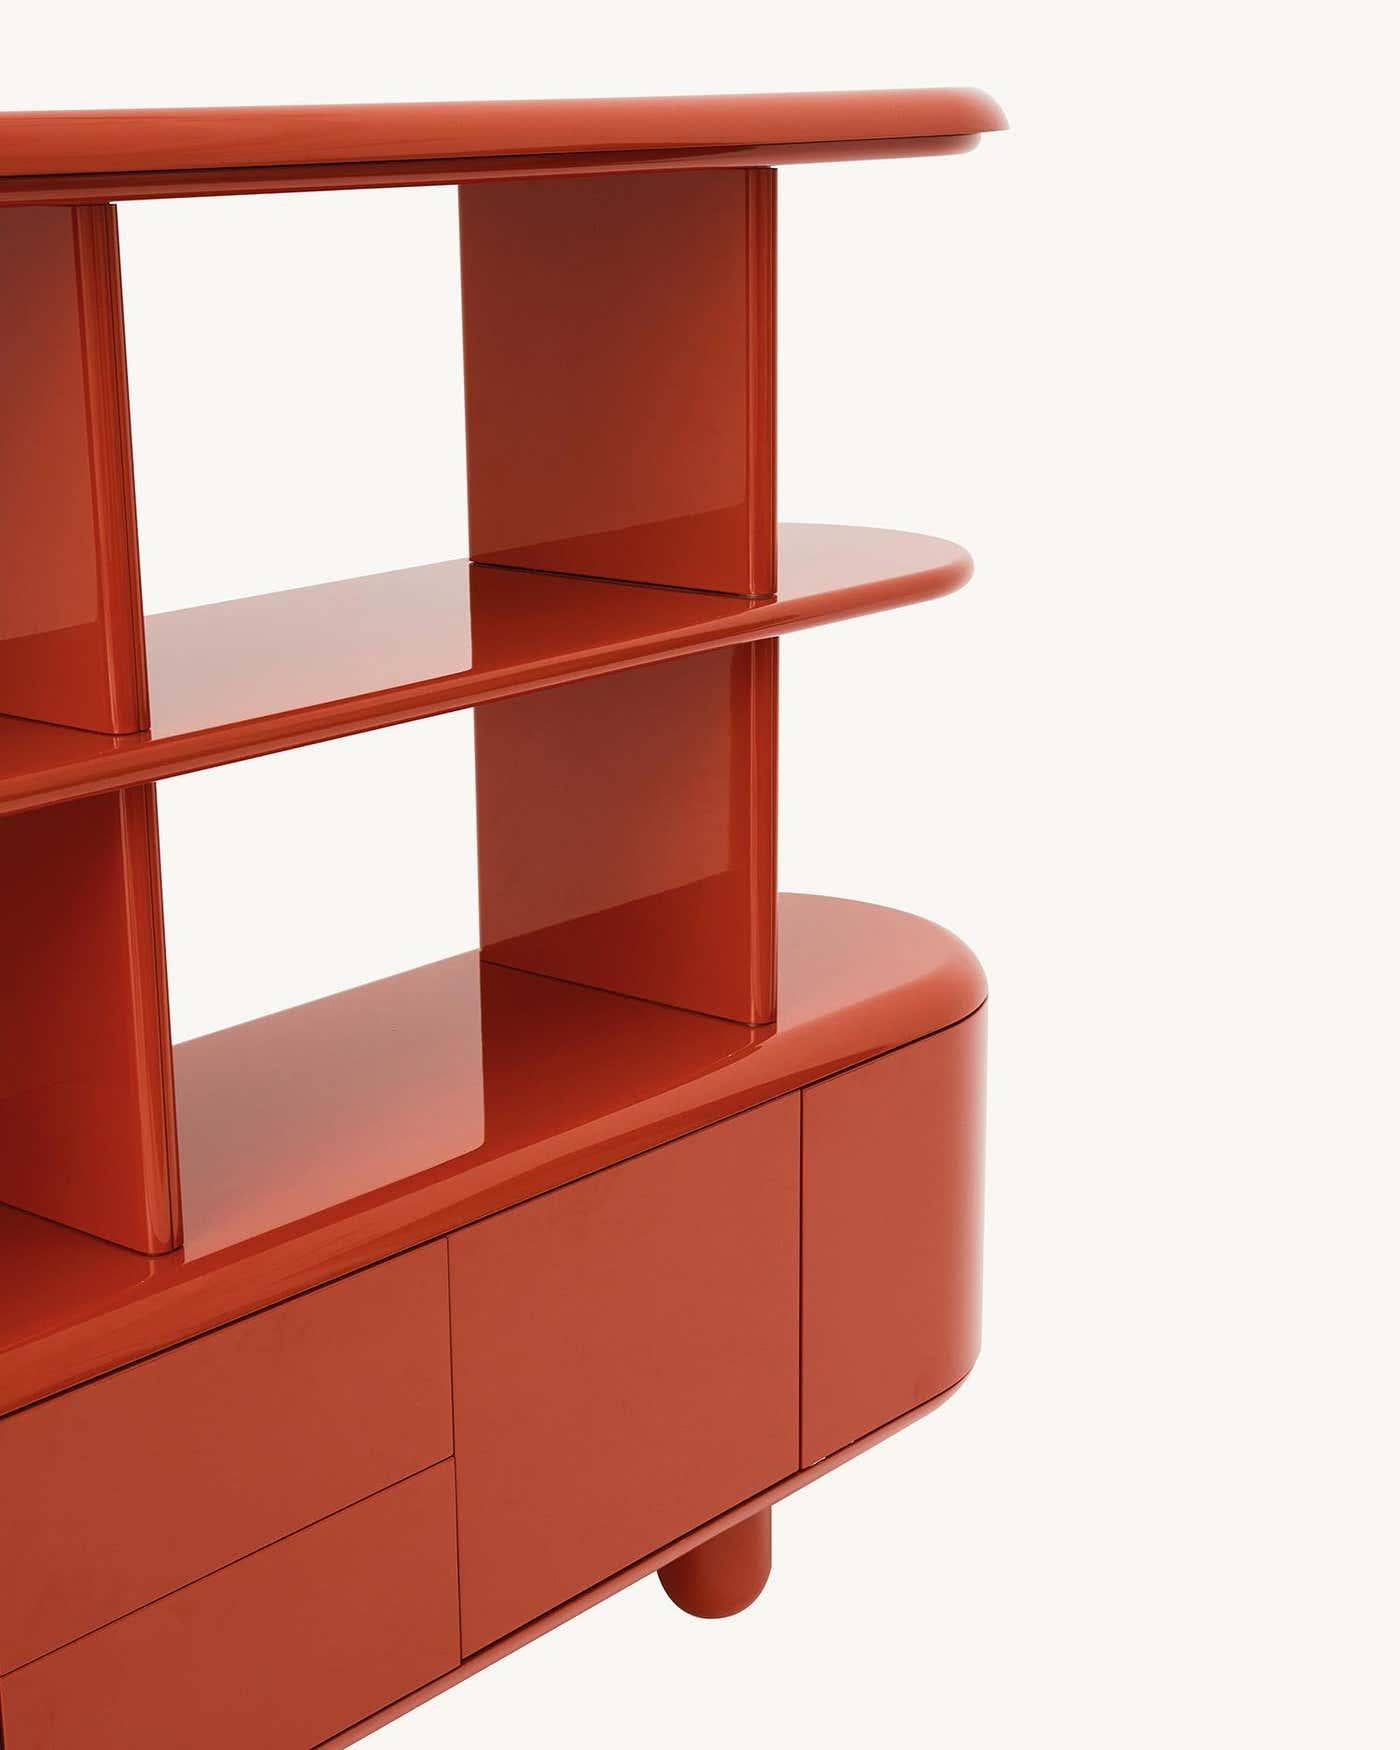 Lacquered Modern Red & White Wood Sideboard 4 Doors + Drawers by Jaime Hayon